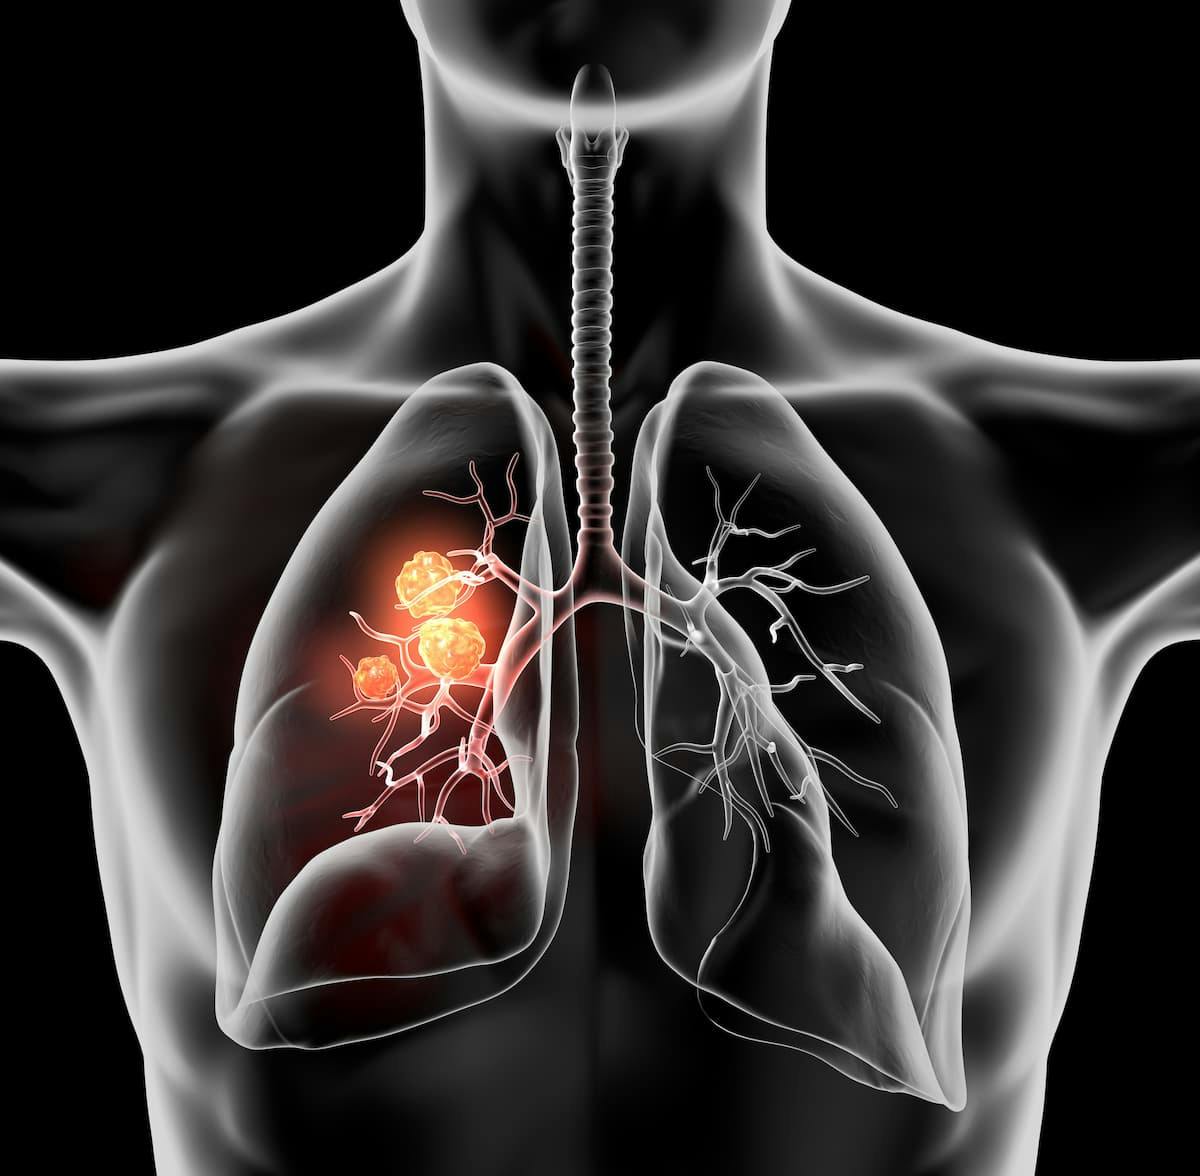 The fourth-generation tyrosine kinase inhibitor yields several partial responses and a tolerable safety profile in a small population of patients with EGFR-mutated non–small cell lung cancer in a phase 1 trial.